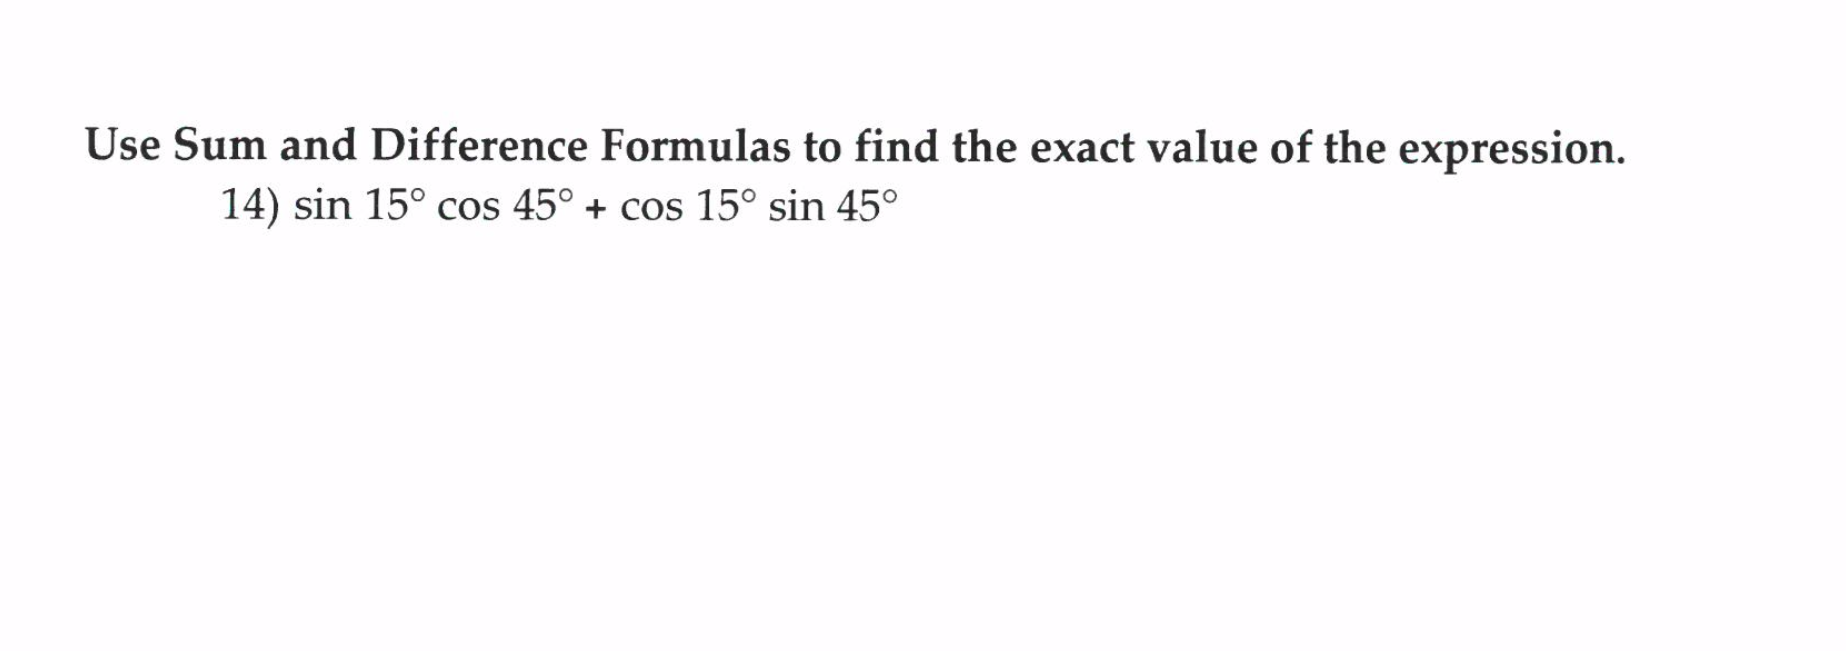 Use Sum and Difference Formulas to find the exact value of the expression.
14) sin 15° cos 45° + cos 15° sin 45°
